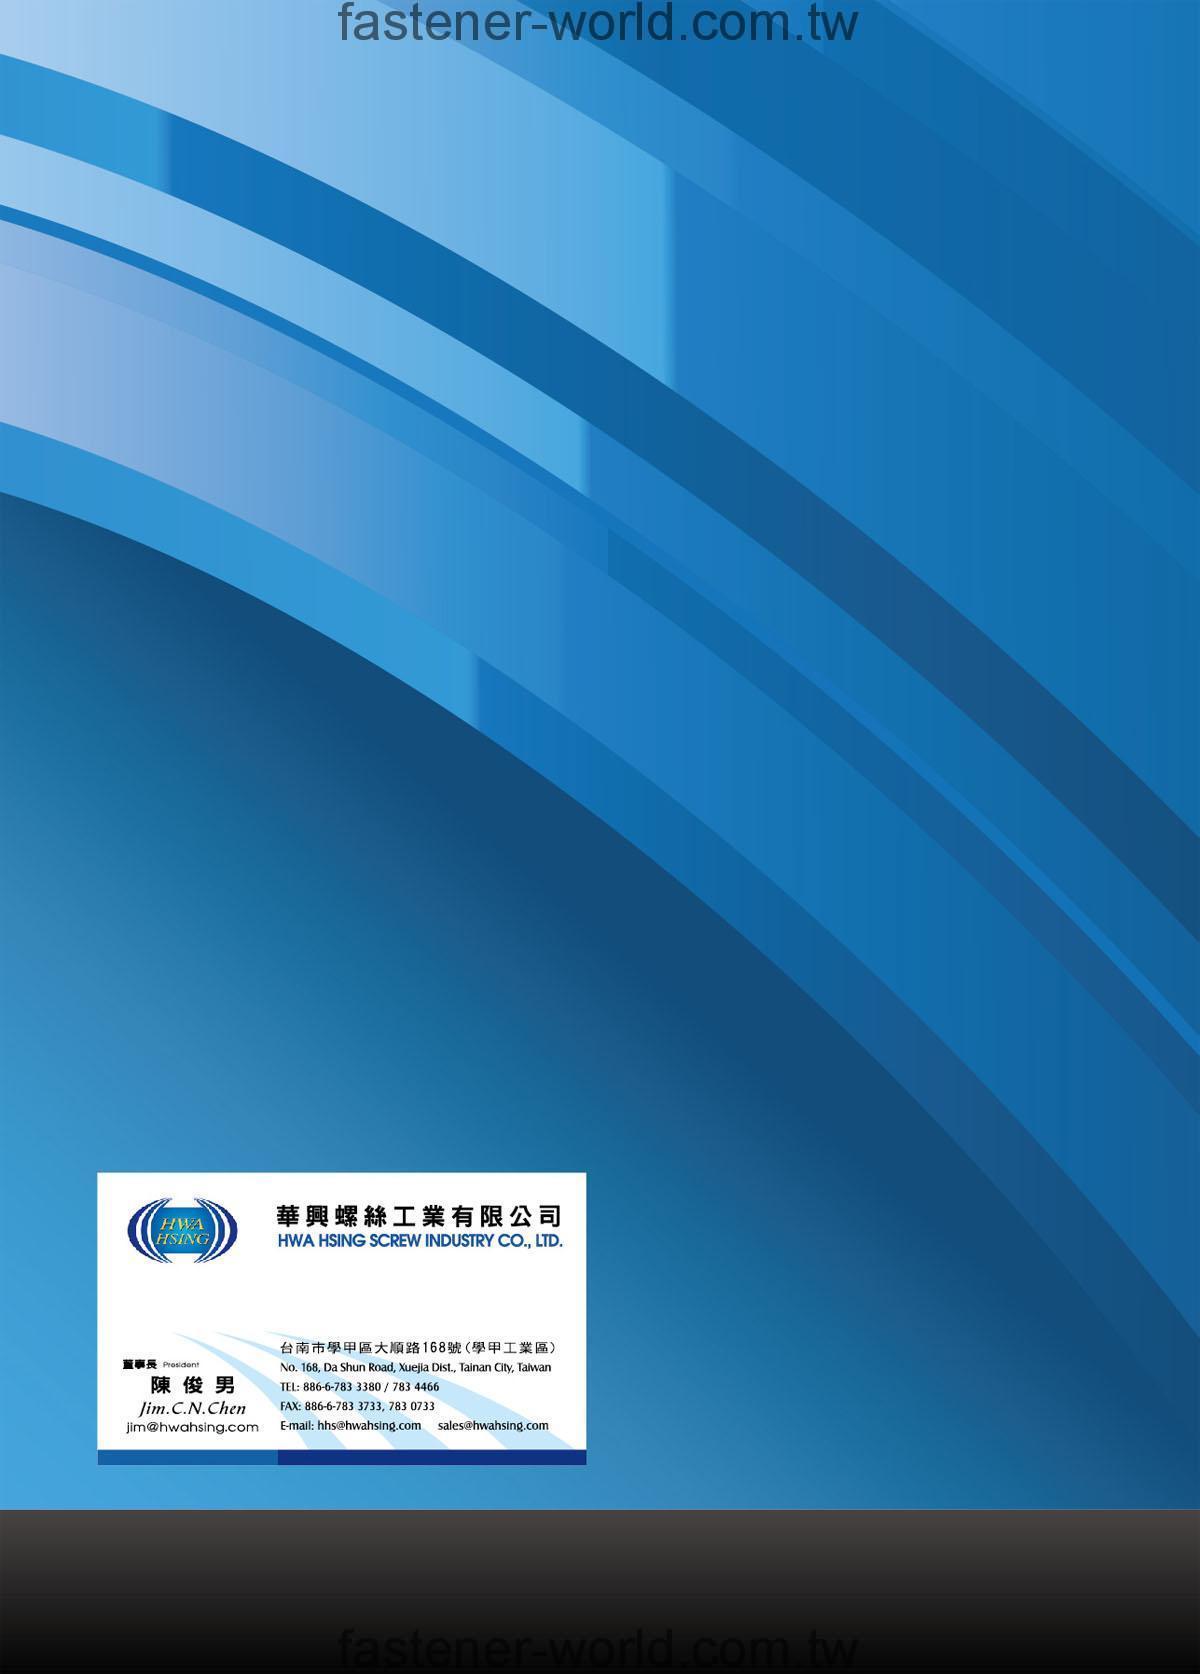 HWA HSING SCREW INDUSTRY CO., LTD. _Online Catalogues